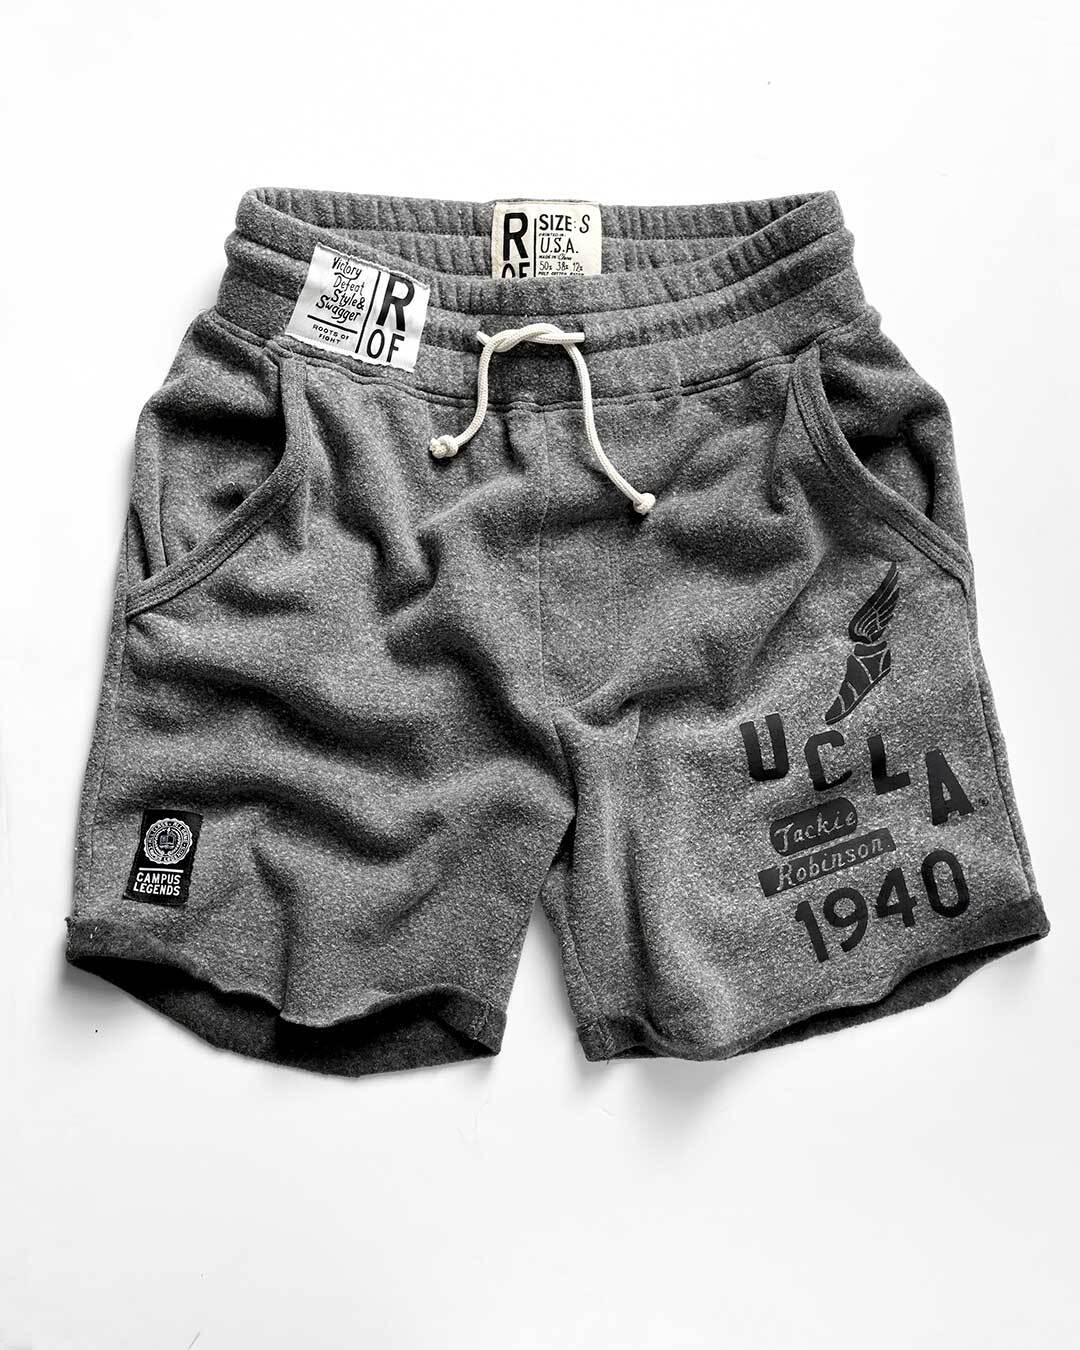 UCLA - Jackie Robinson Track Grey Shorts - Roots of Fight Canada